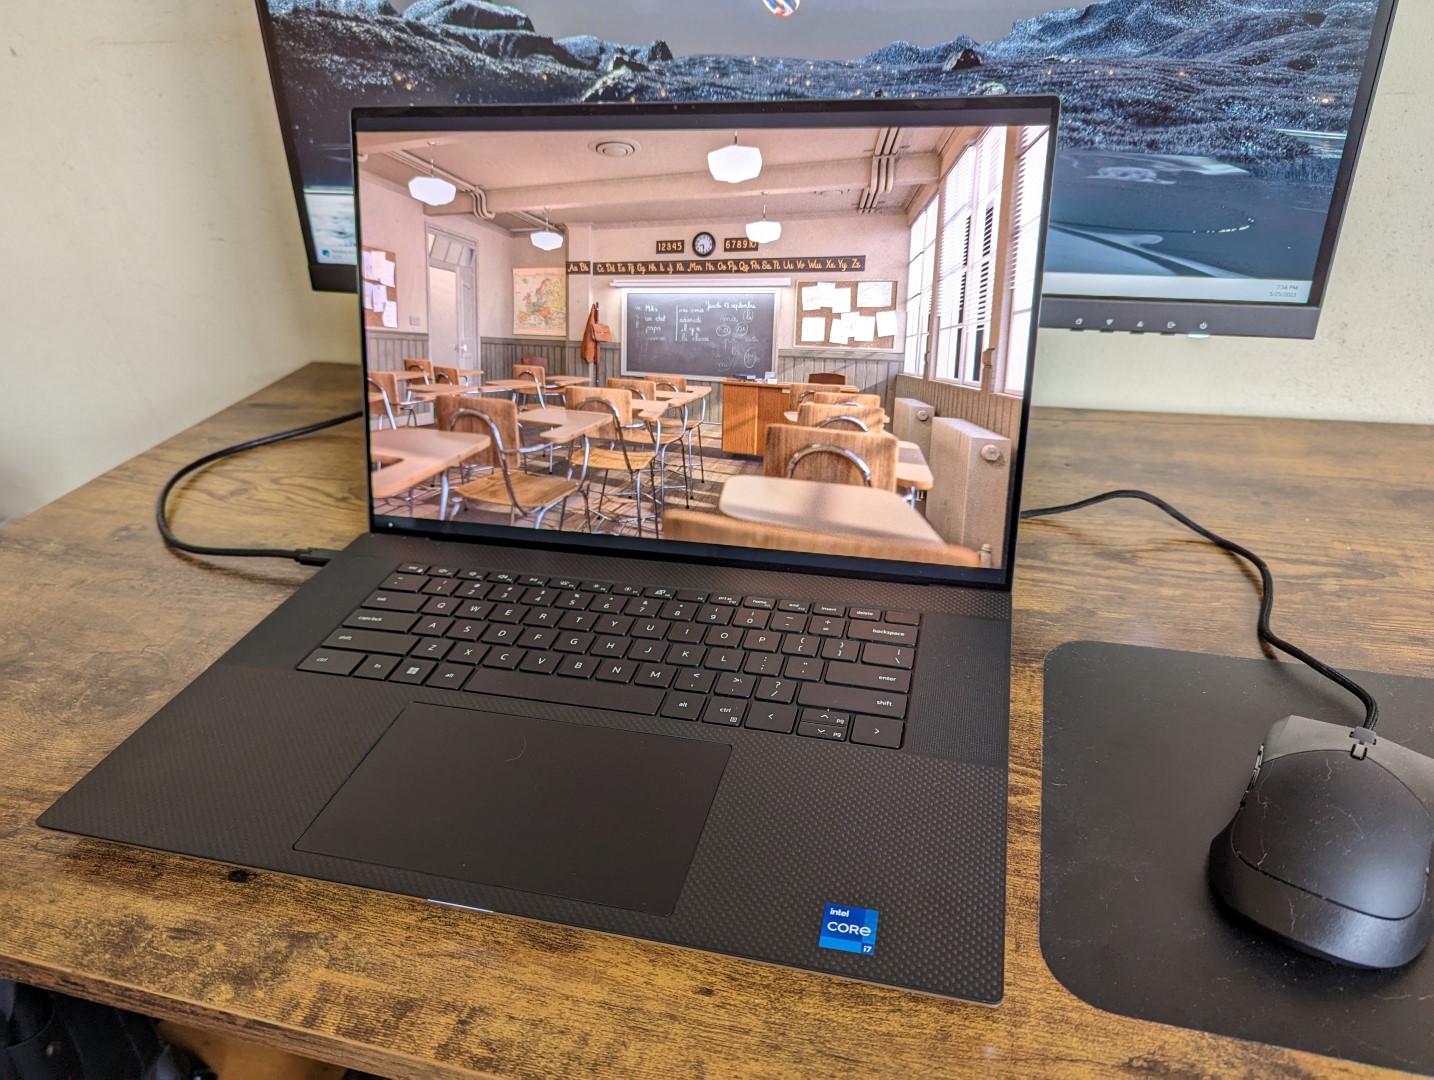 The 2023 XPS 17 9730 is the fourth iteration of the original 2020 XPS 17 9700 design. It is an internal update with 13th gen Intel Raptor Lake-H CPUs 